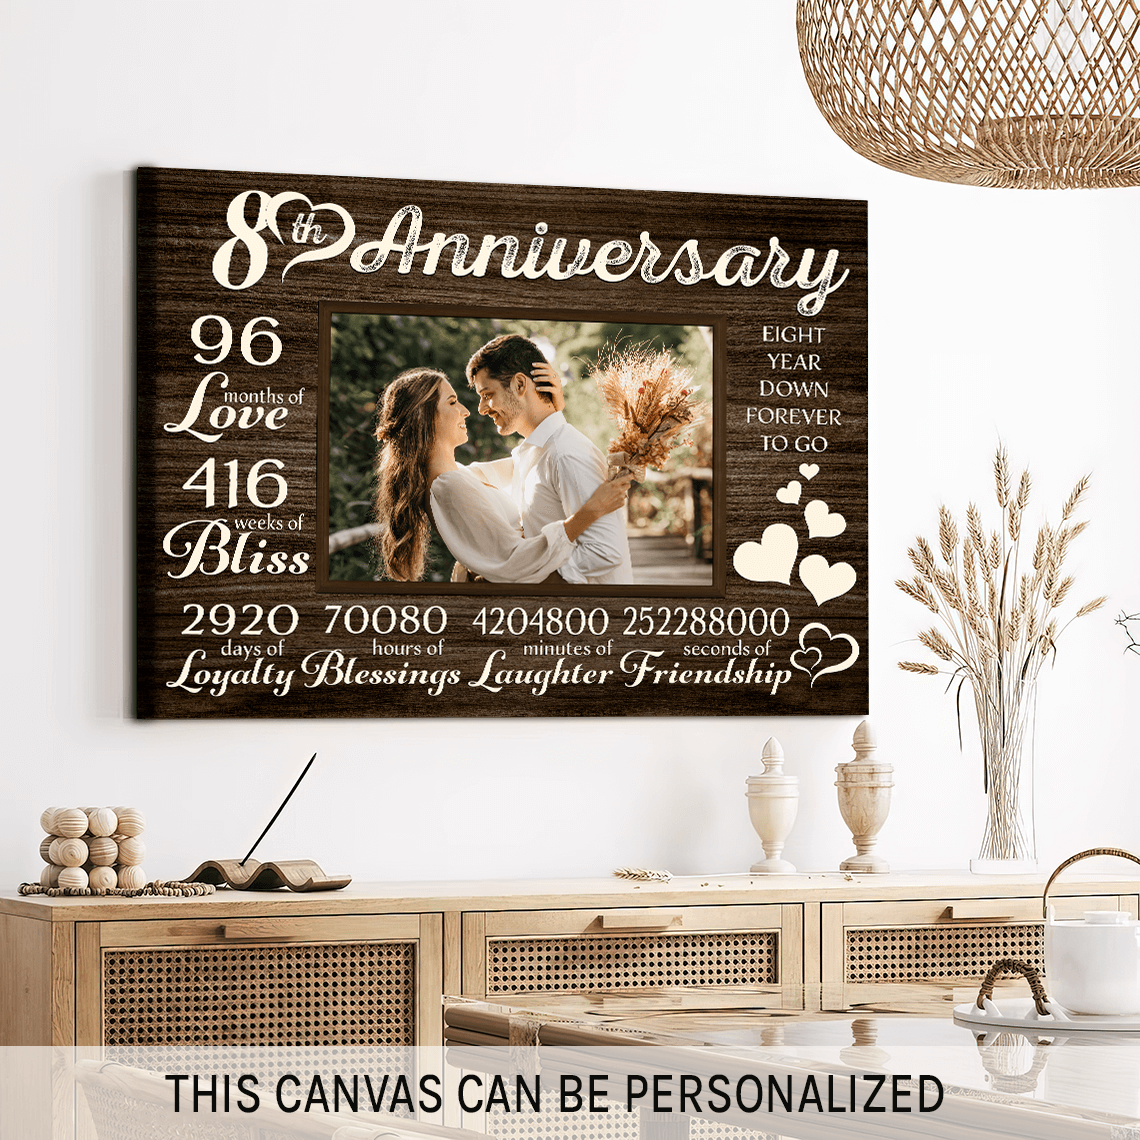 8th Anniversary, Traditional Bronze. Wallet Card. Traditional Anniversary. 8  Year Anniversary. 8 Year Countdown. - Etsy | 8 year anniversary gift,  Unique wedding anniversary gifts, 8th wedding anniversary gift